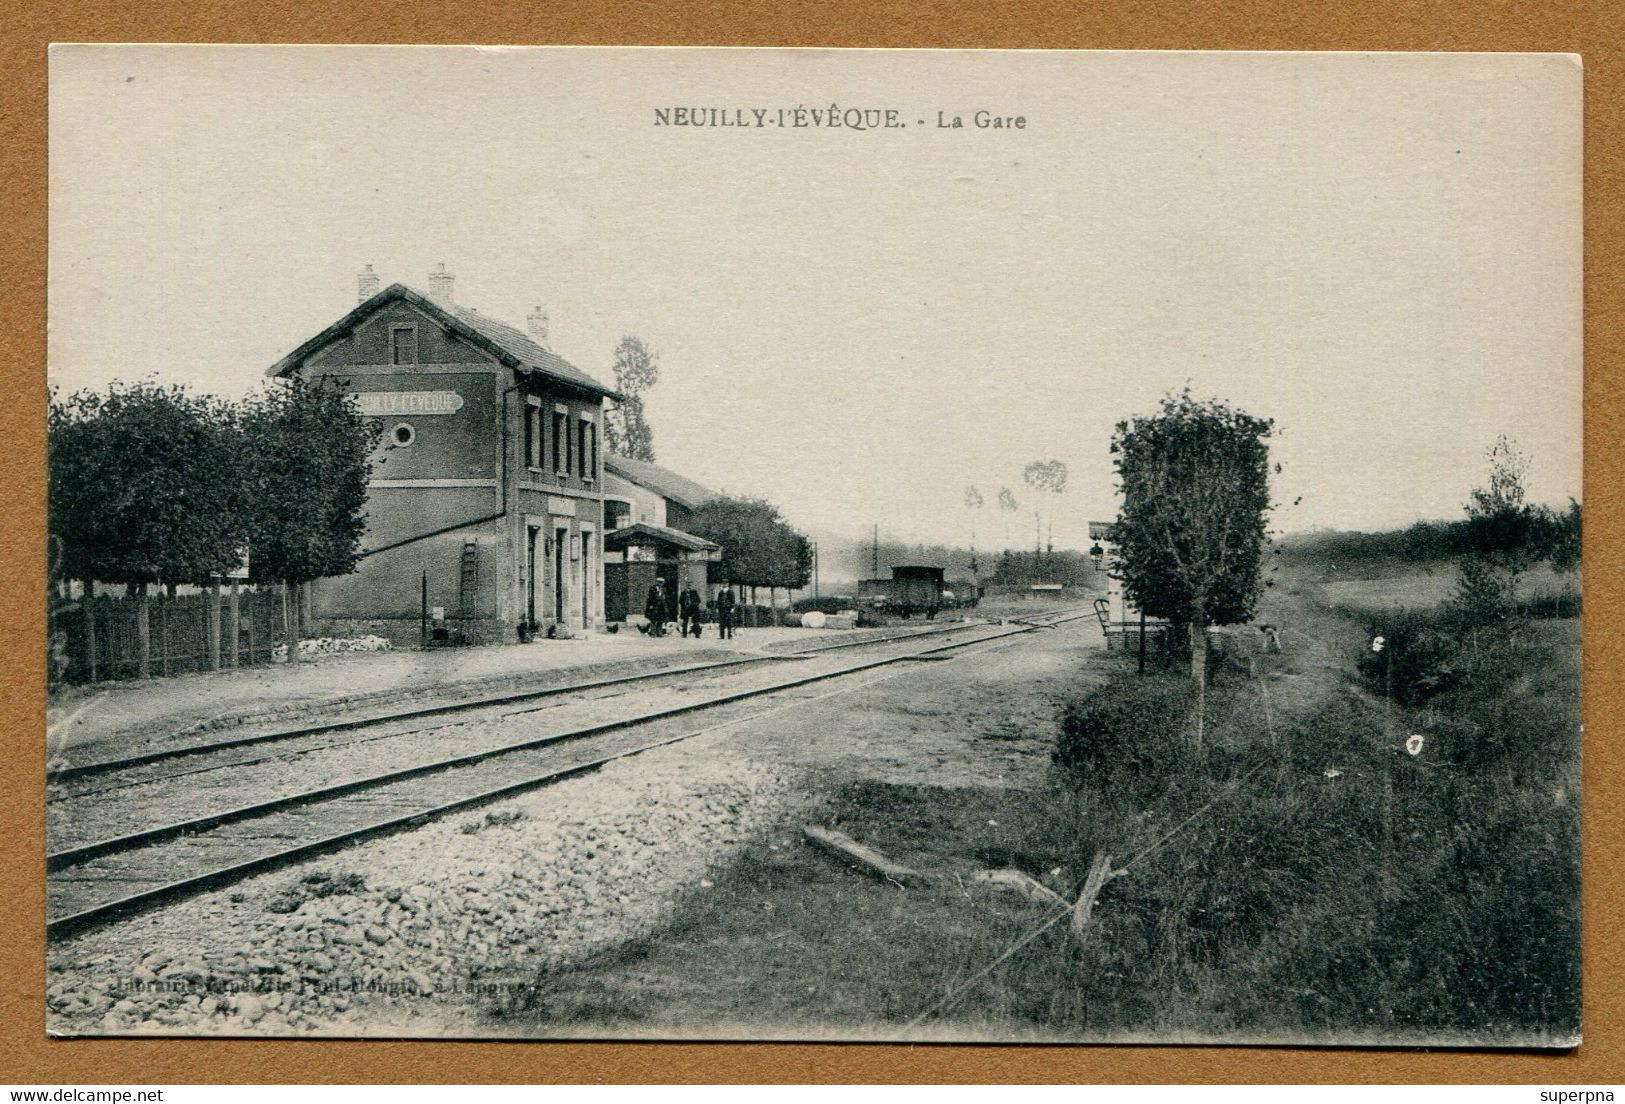 NEUILLY-L'EVEQUE (52) :  " LA GARE " - Neuilly L'Eveque